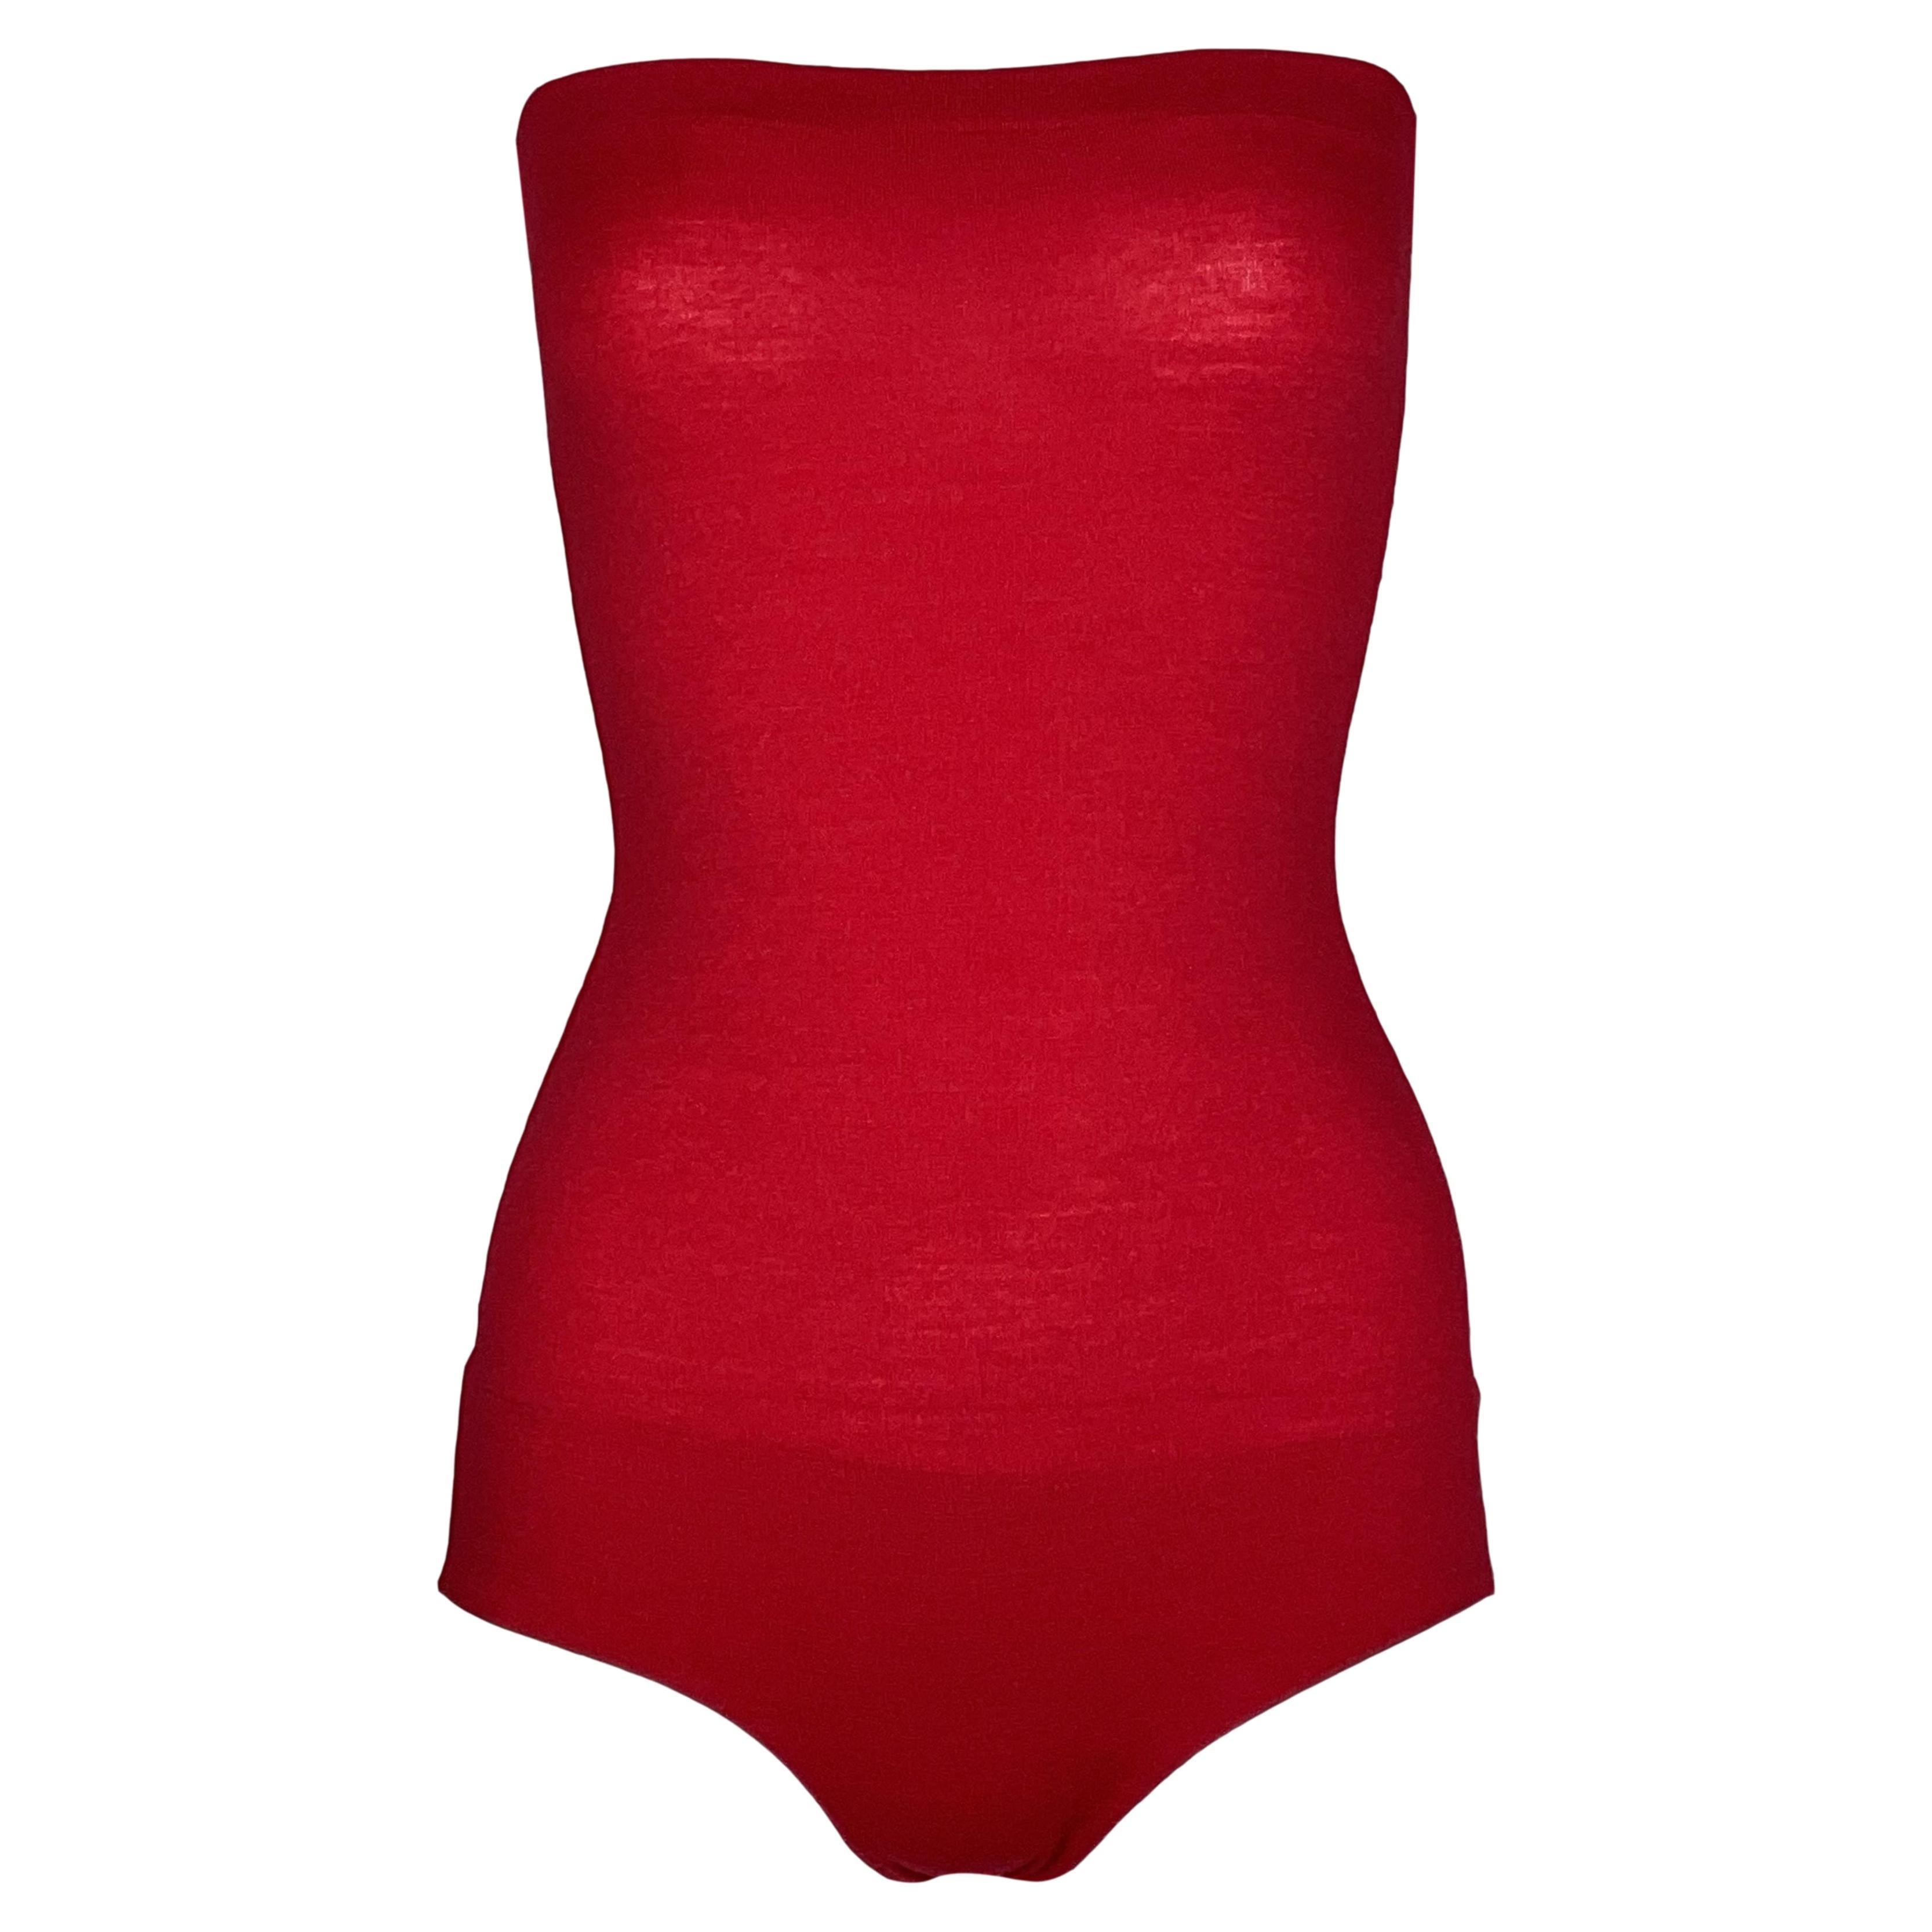 Vintage 1991 Dolce and Gabbana Red Strapless Bodysuit Top For Sale